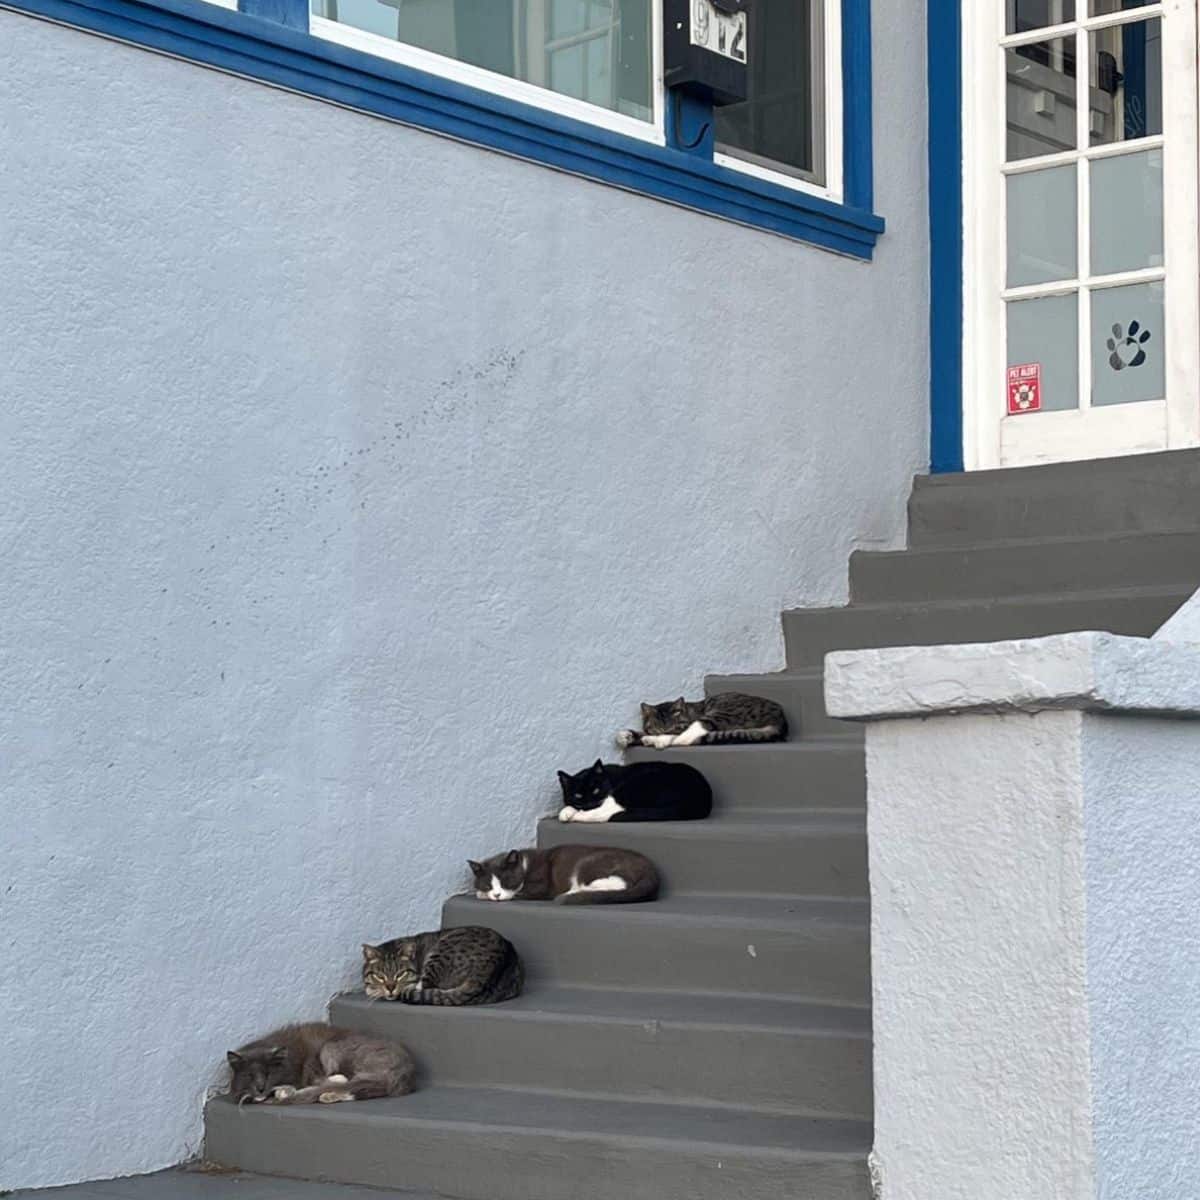 cats on the stairs